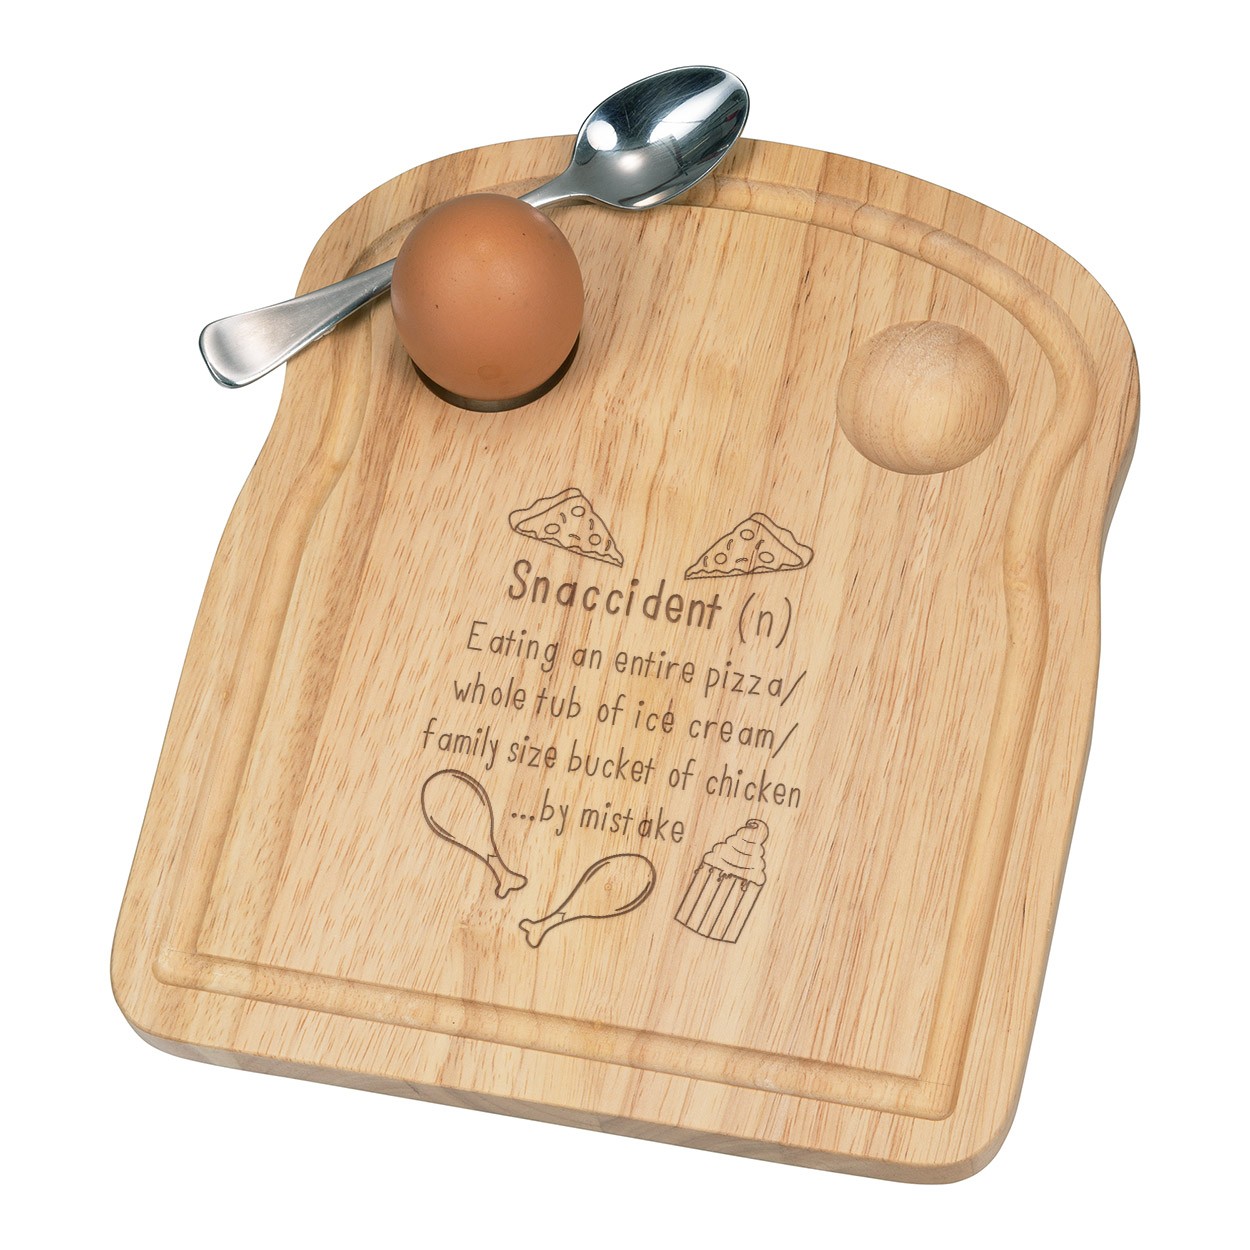 Snaccident Definition Breakfast Dippy Egg Cup Board Wooden